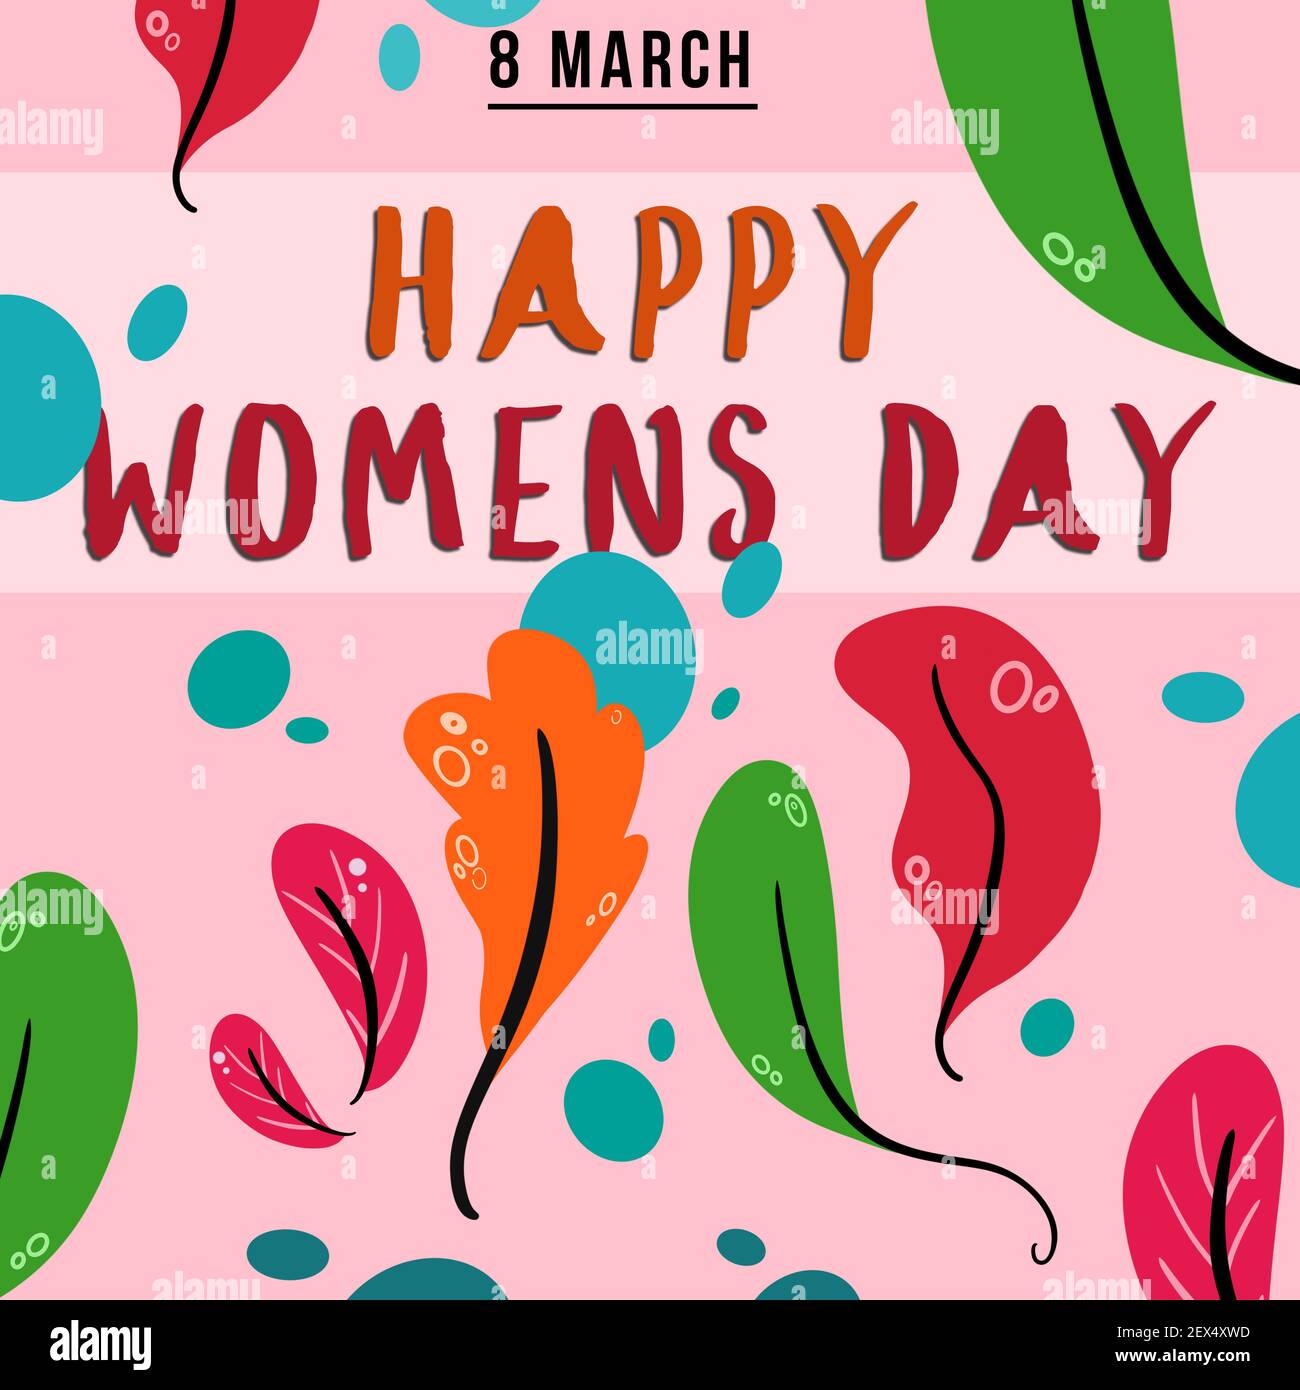 Greeting card for International Women's Day, 8 march, flyer for holidays with flowers and leaves illustrations, wishing happy holiday Stock Photo